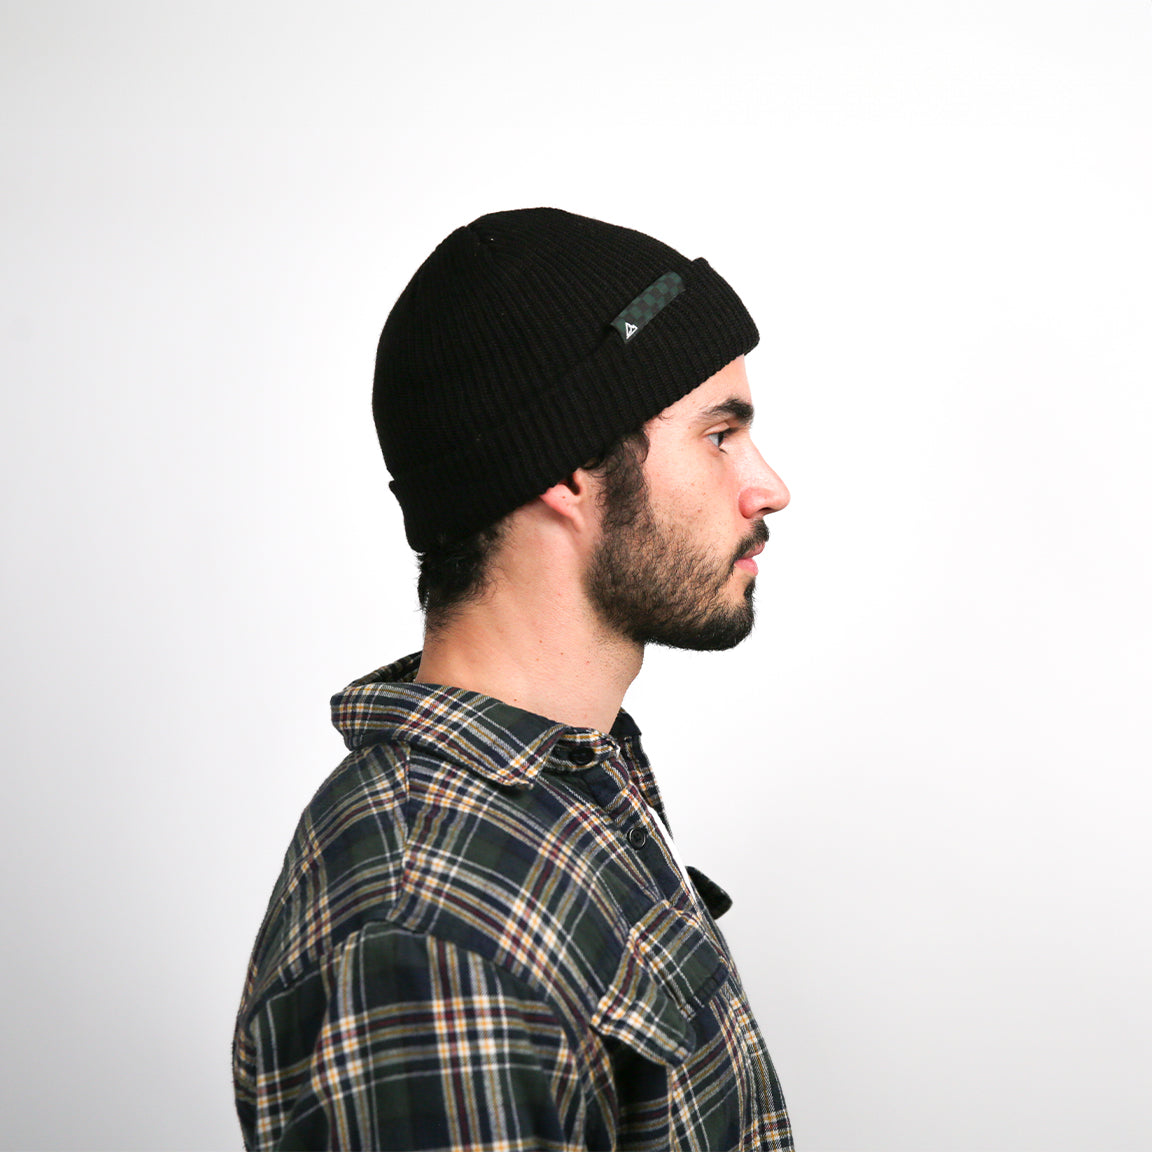 Here, the beanie is shown from the side with a green and black checkered logo patch, providing a slight variation in design while maintaining the overall look and feel.